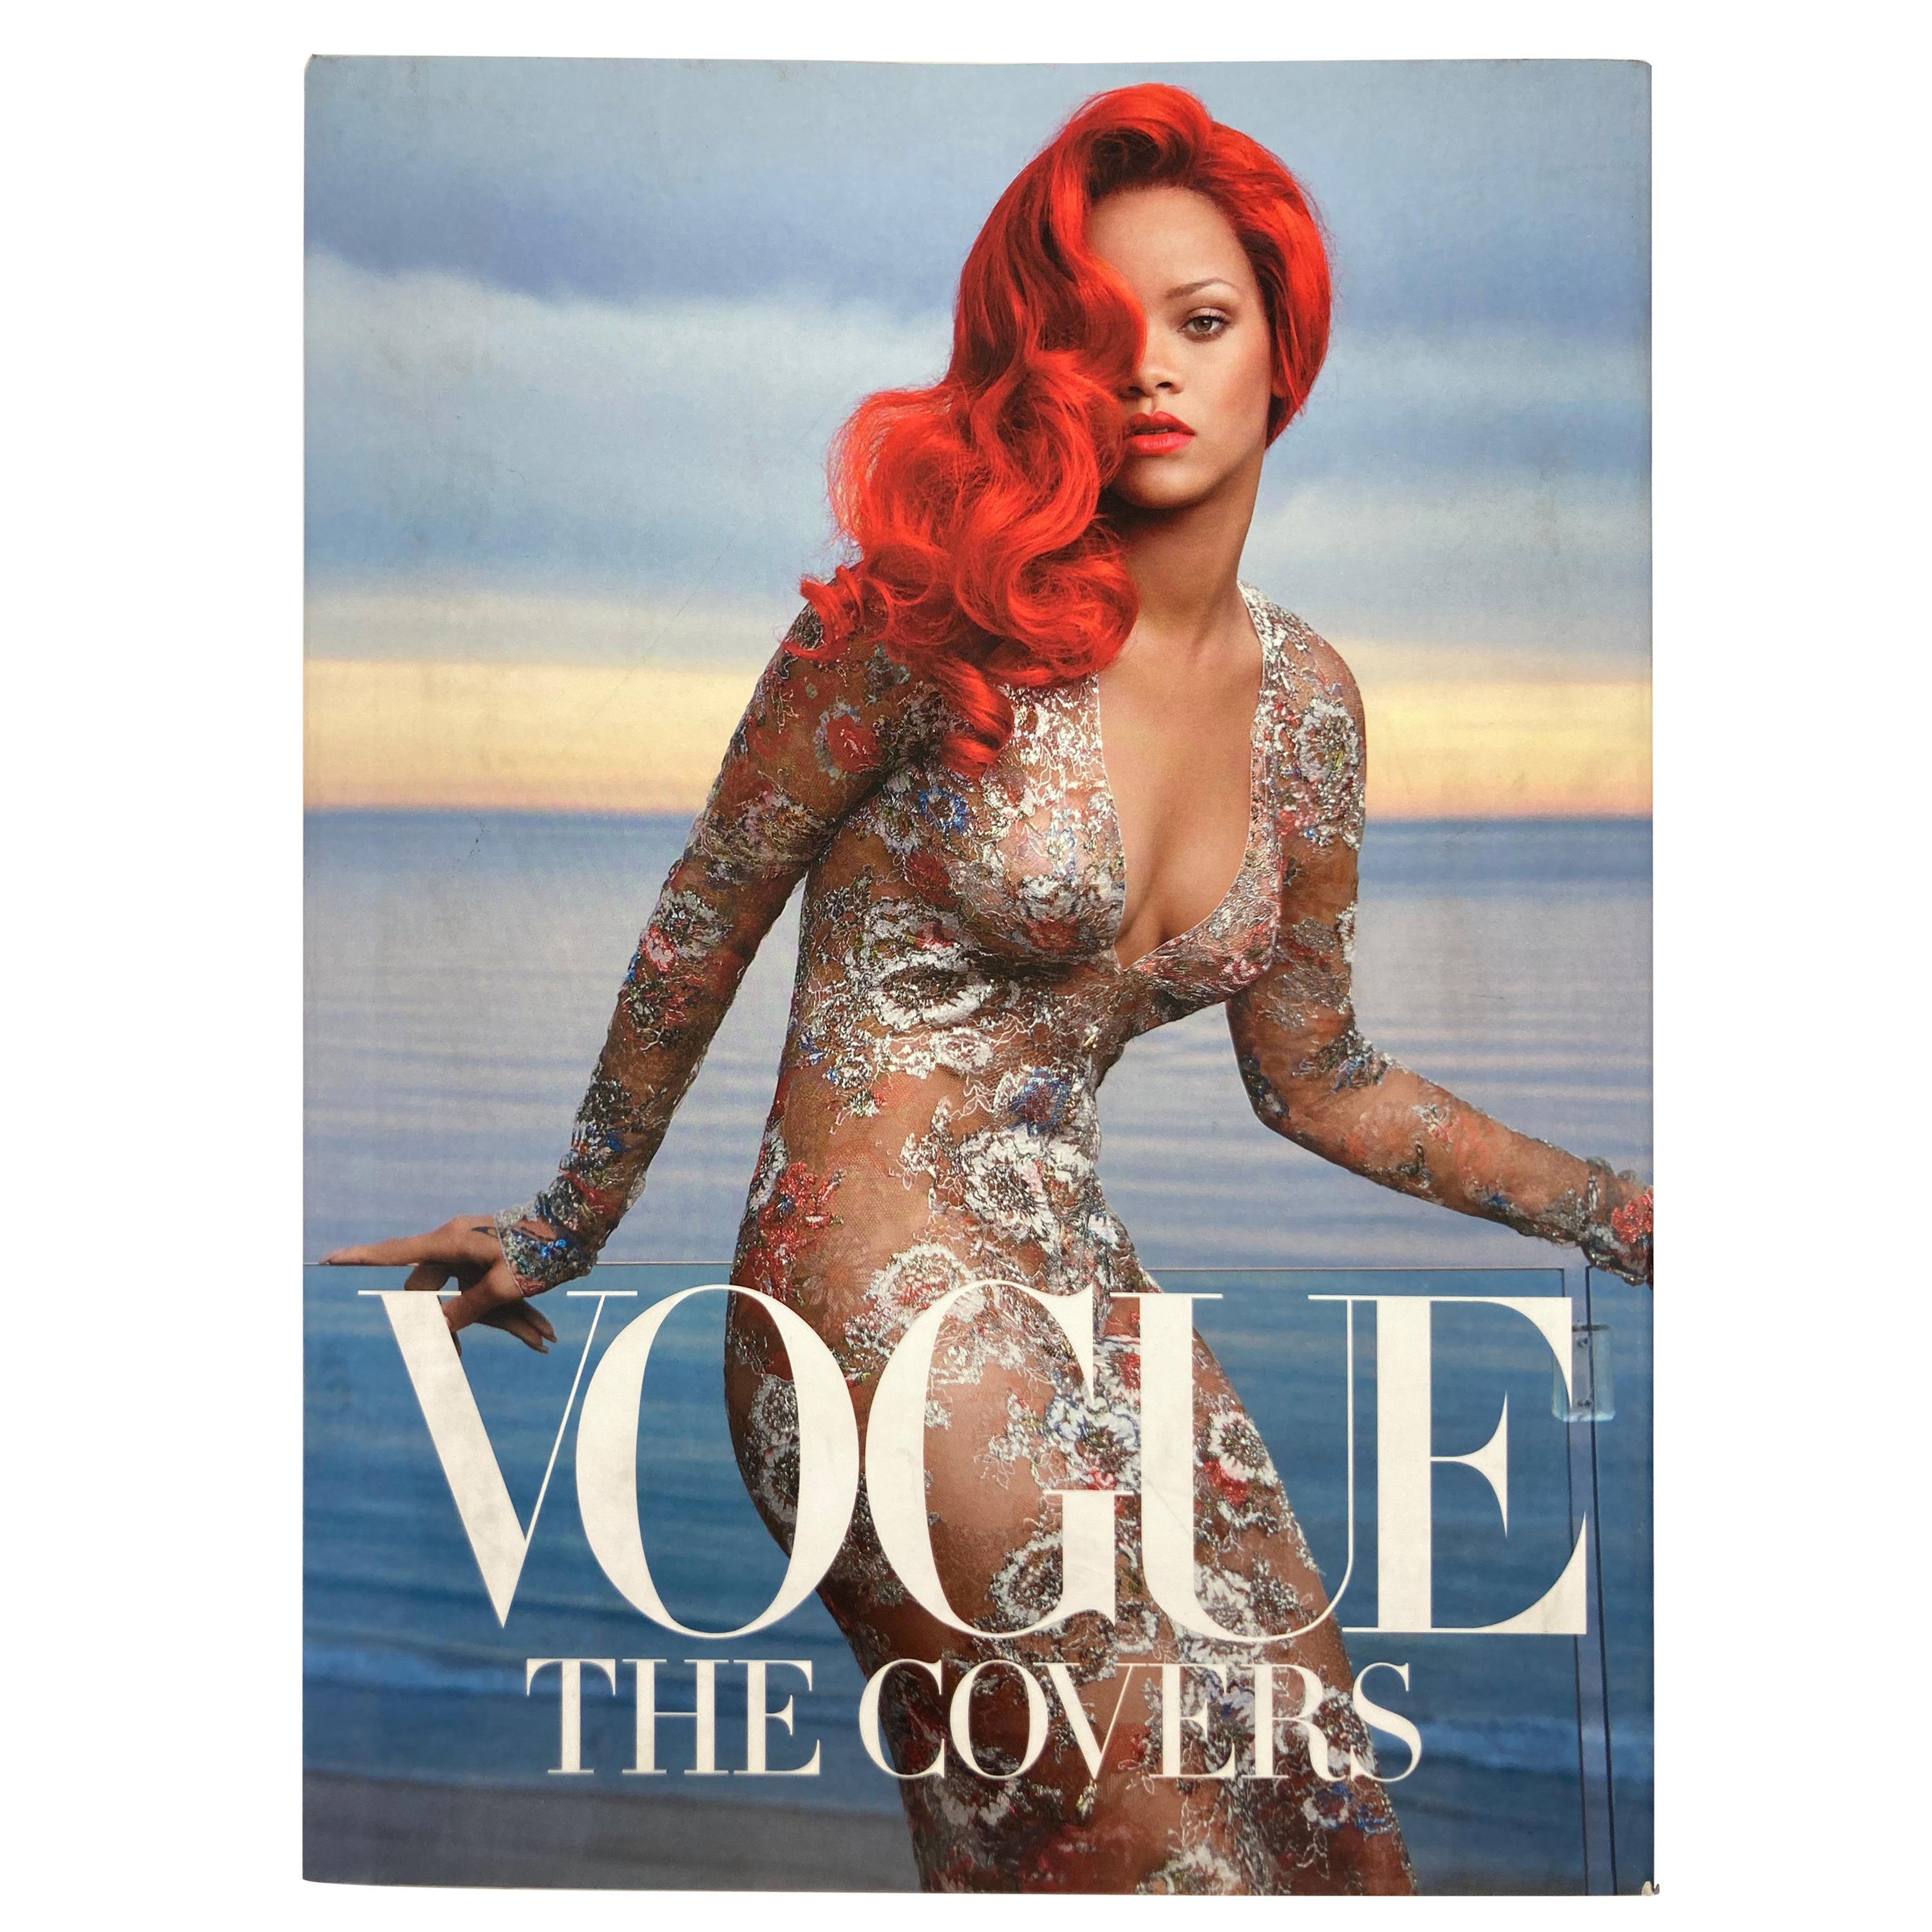 Vogue The Covers Hardcover Coffee Table Book